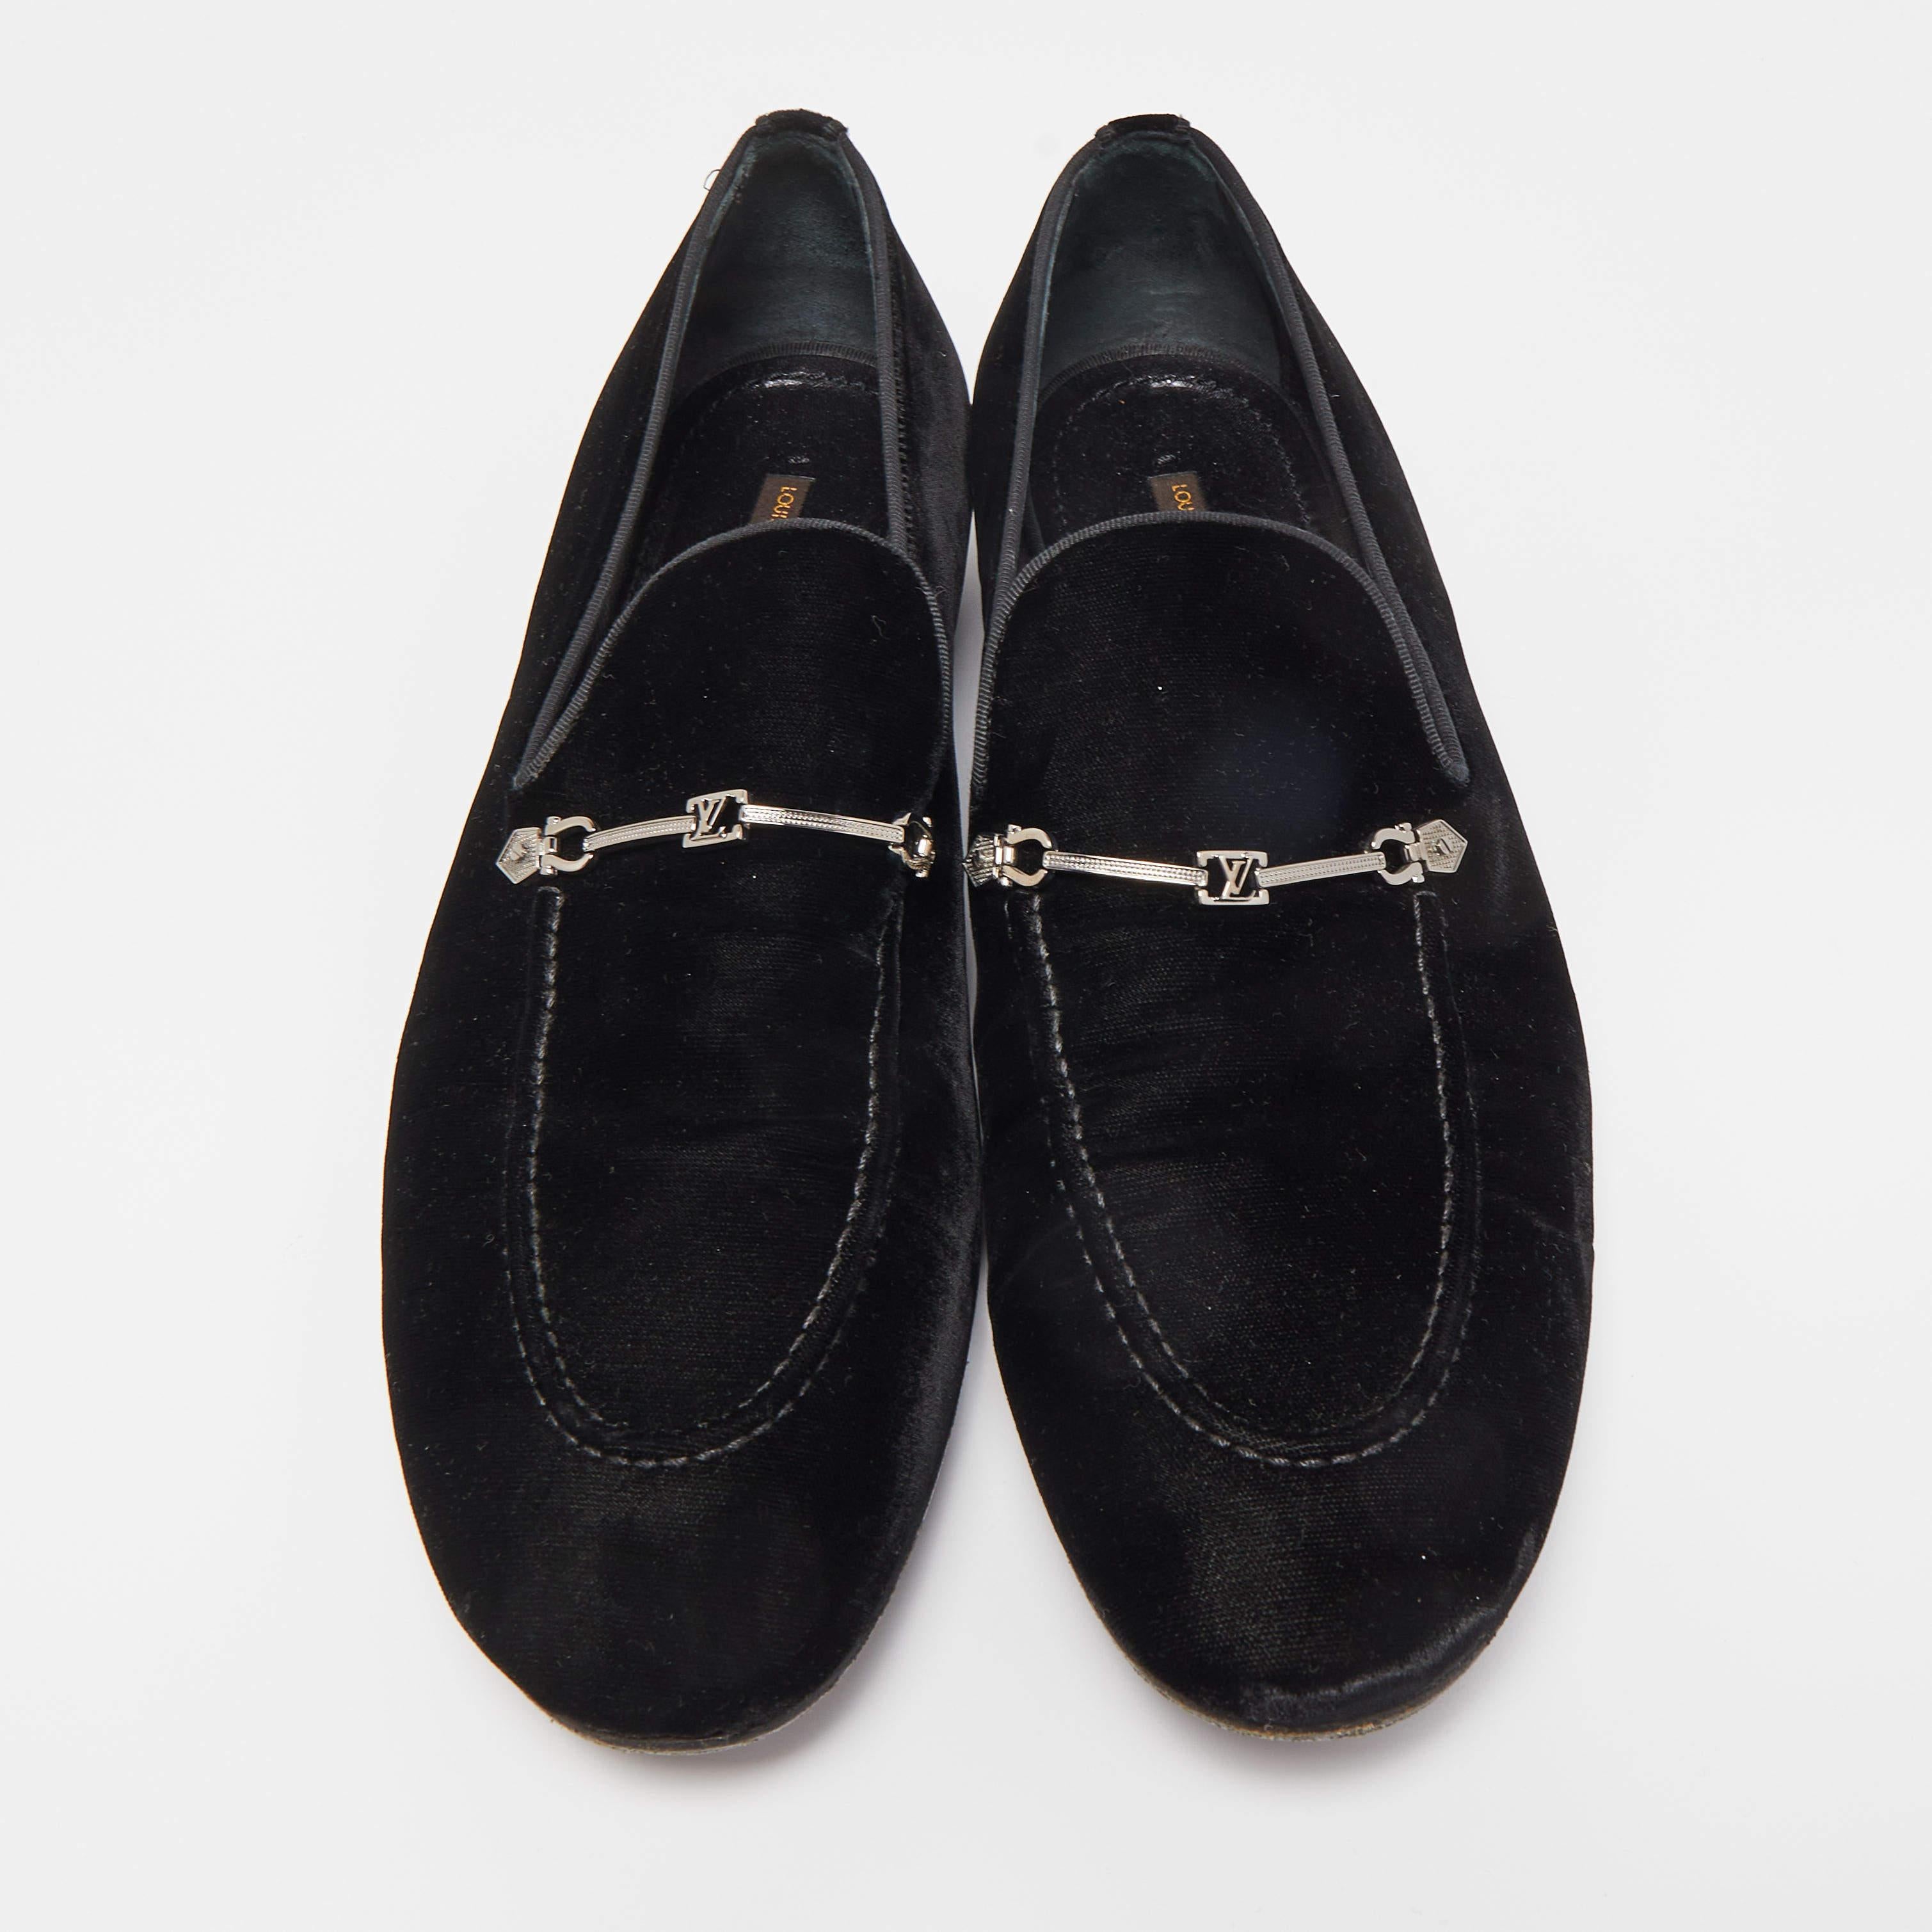 Let this comfortable pair be your first choice when you're out for a long day. These Louis Vuitton loafers for men have well-sewn uppers beautifully set on durable soles.

